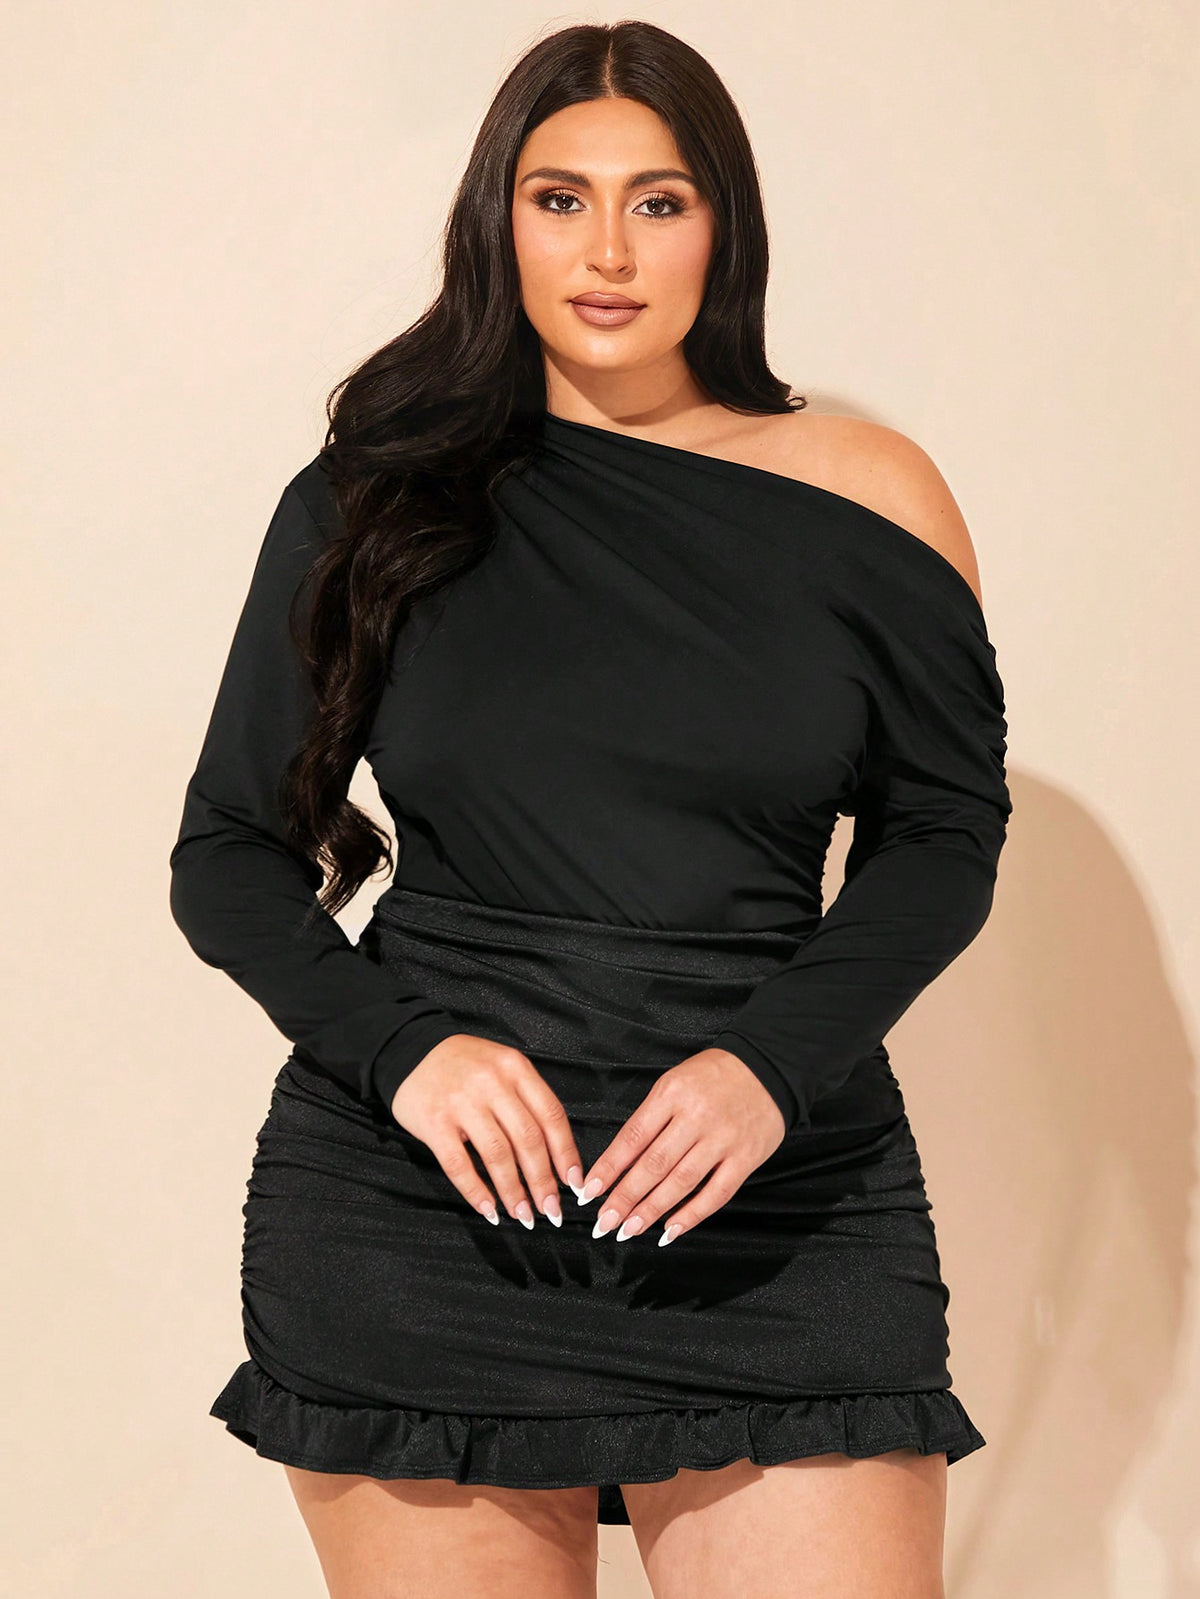 BAE Women's Plus Size Elegant All-Match Black Knitted Stretchy One-Shoulder Long Sleeve Bodysuit, Perfect For Dating Or Going Out